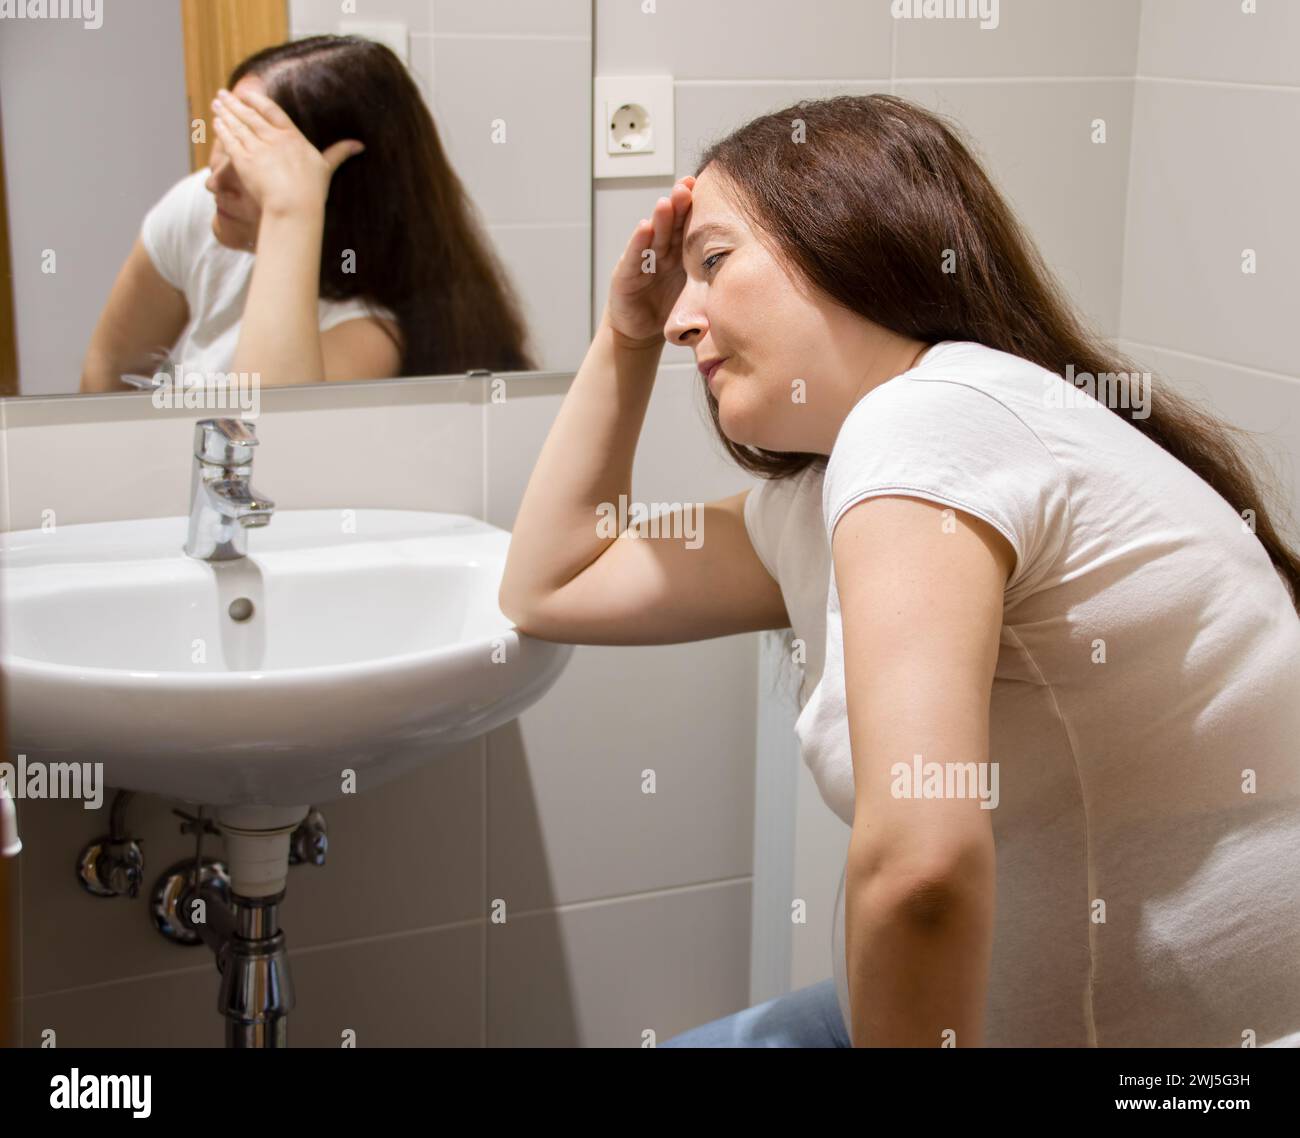 A pregnant woman struggling with morning sickness in the bathroom Stock Photo